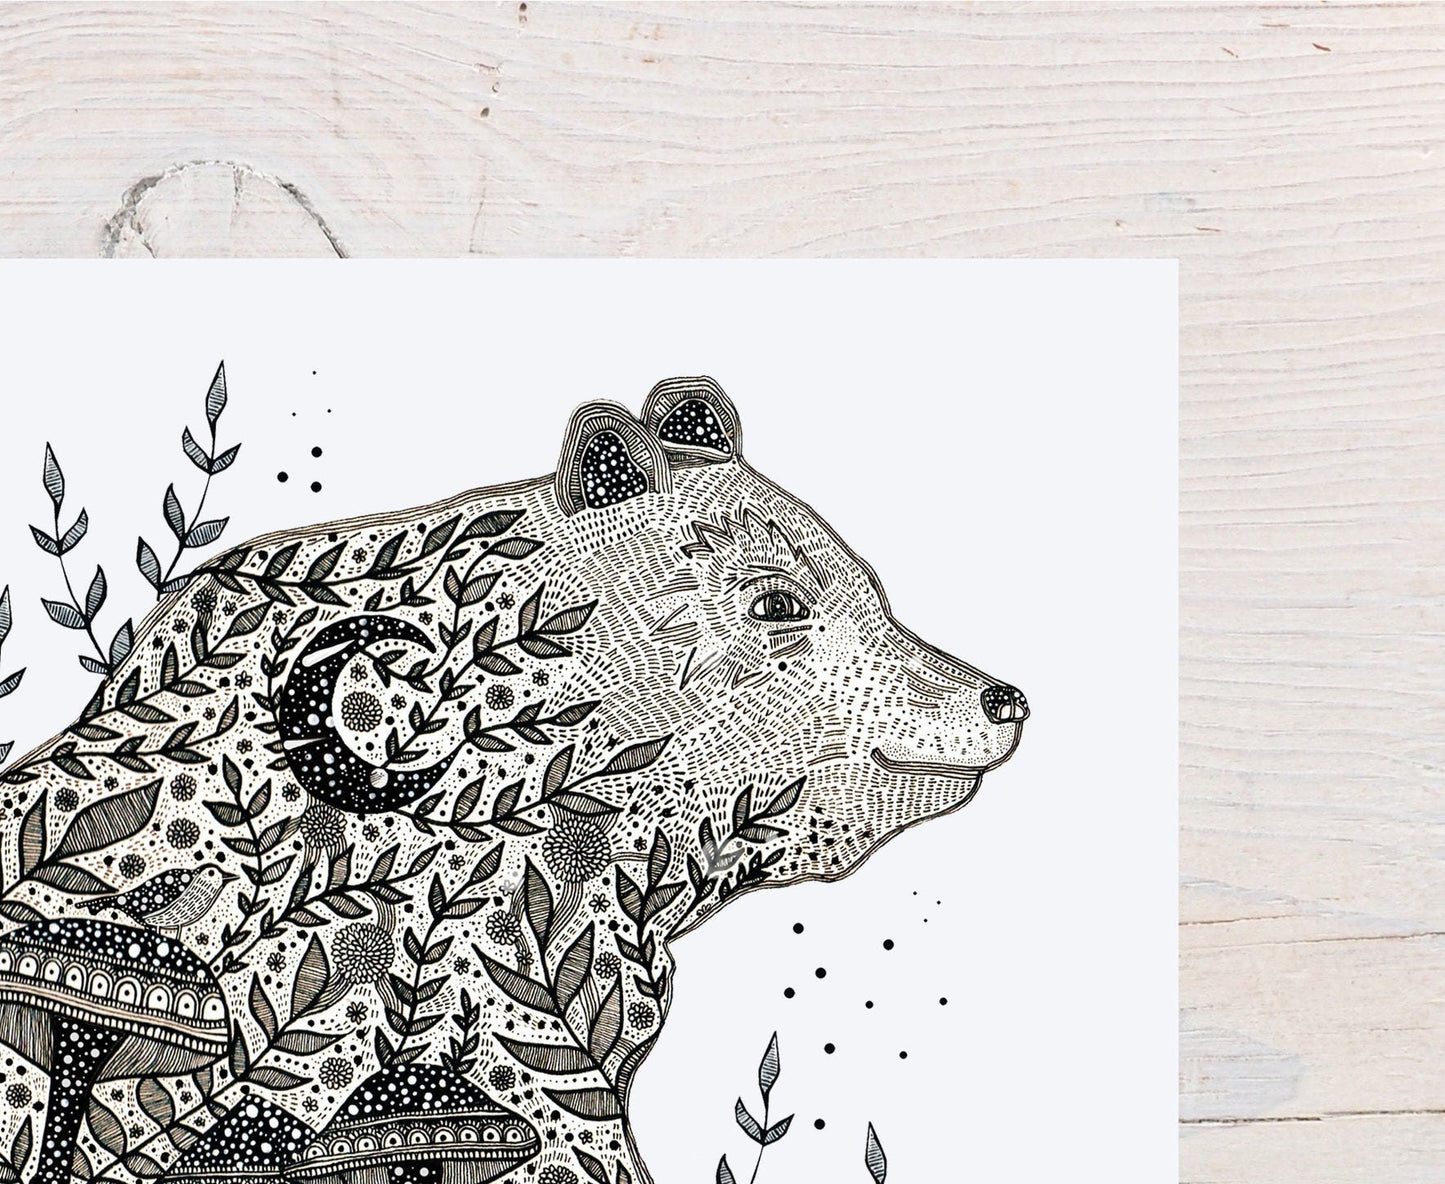 The Bear Who Ate The Forest / Art Print